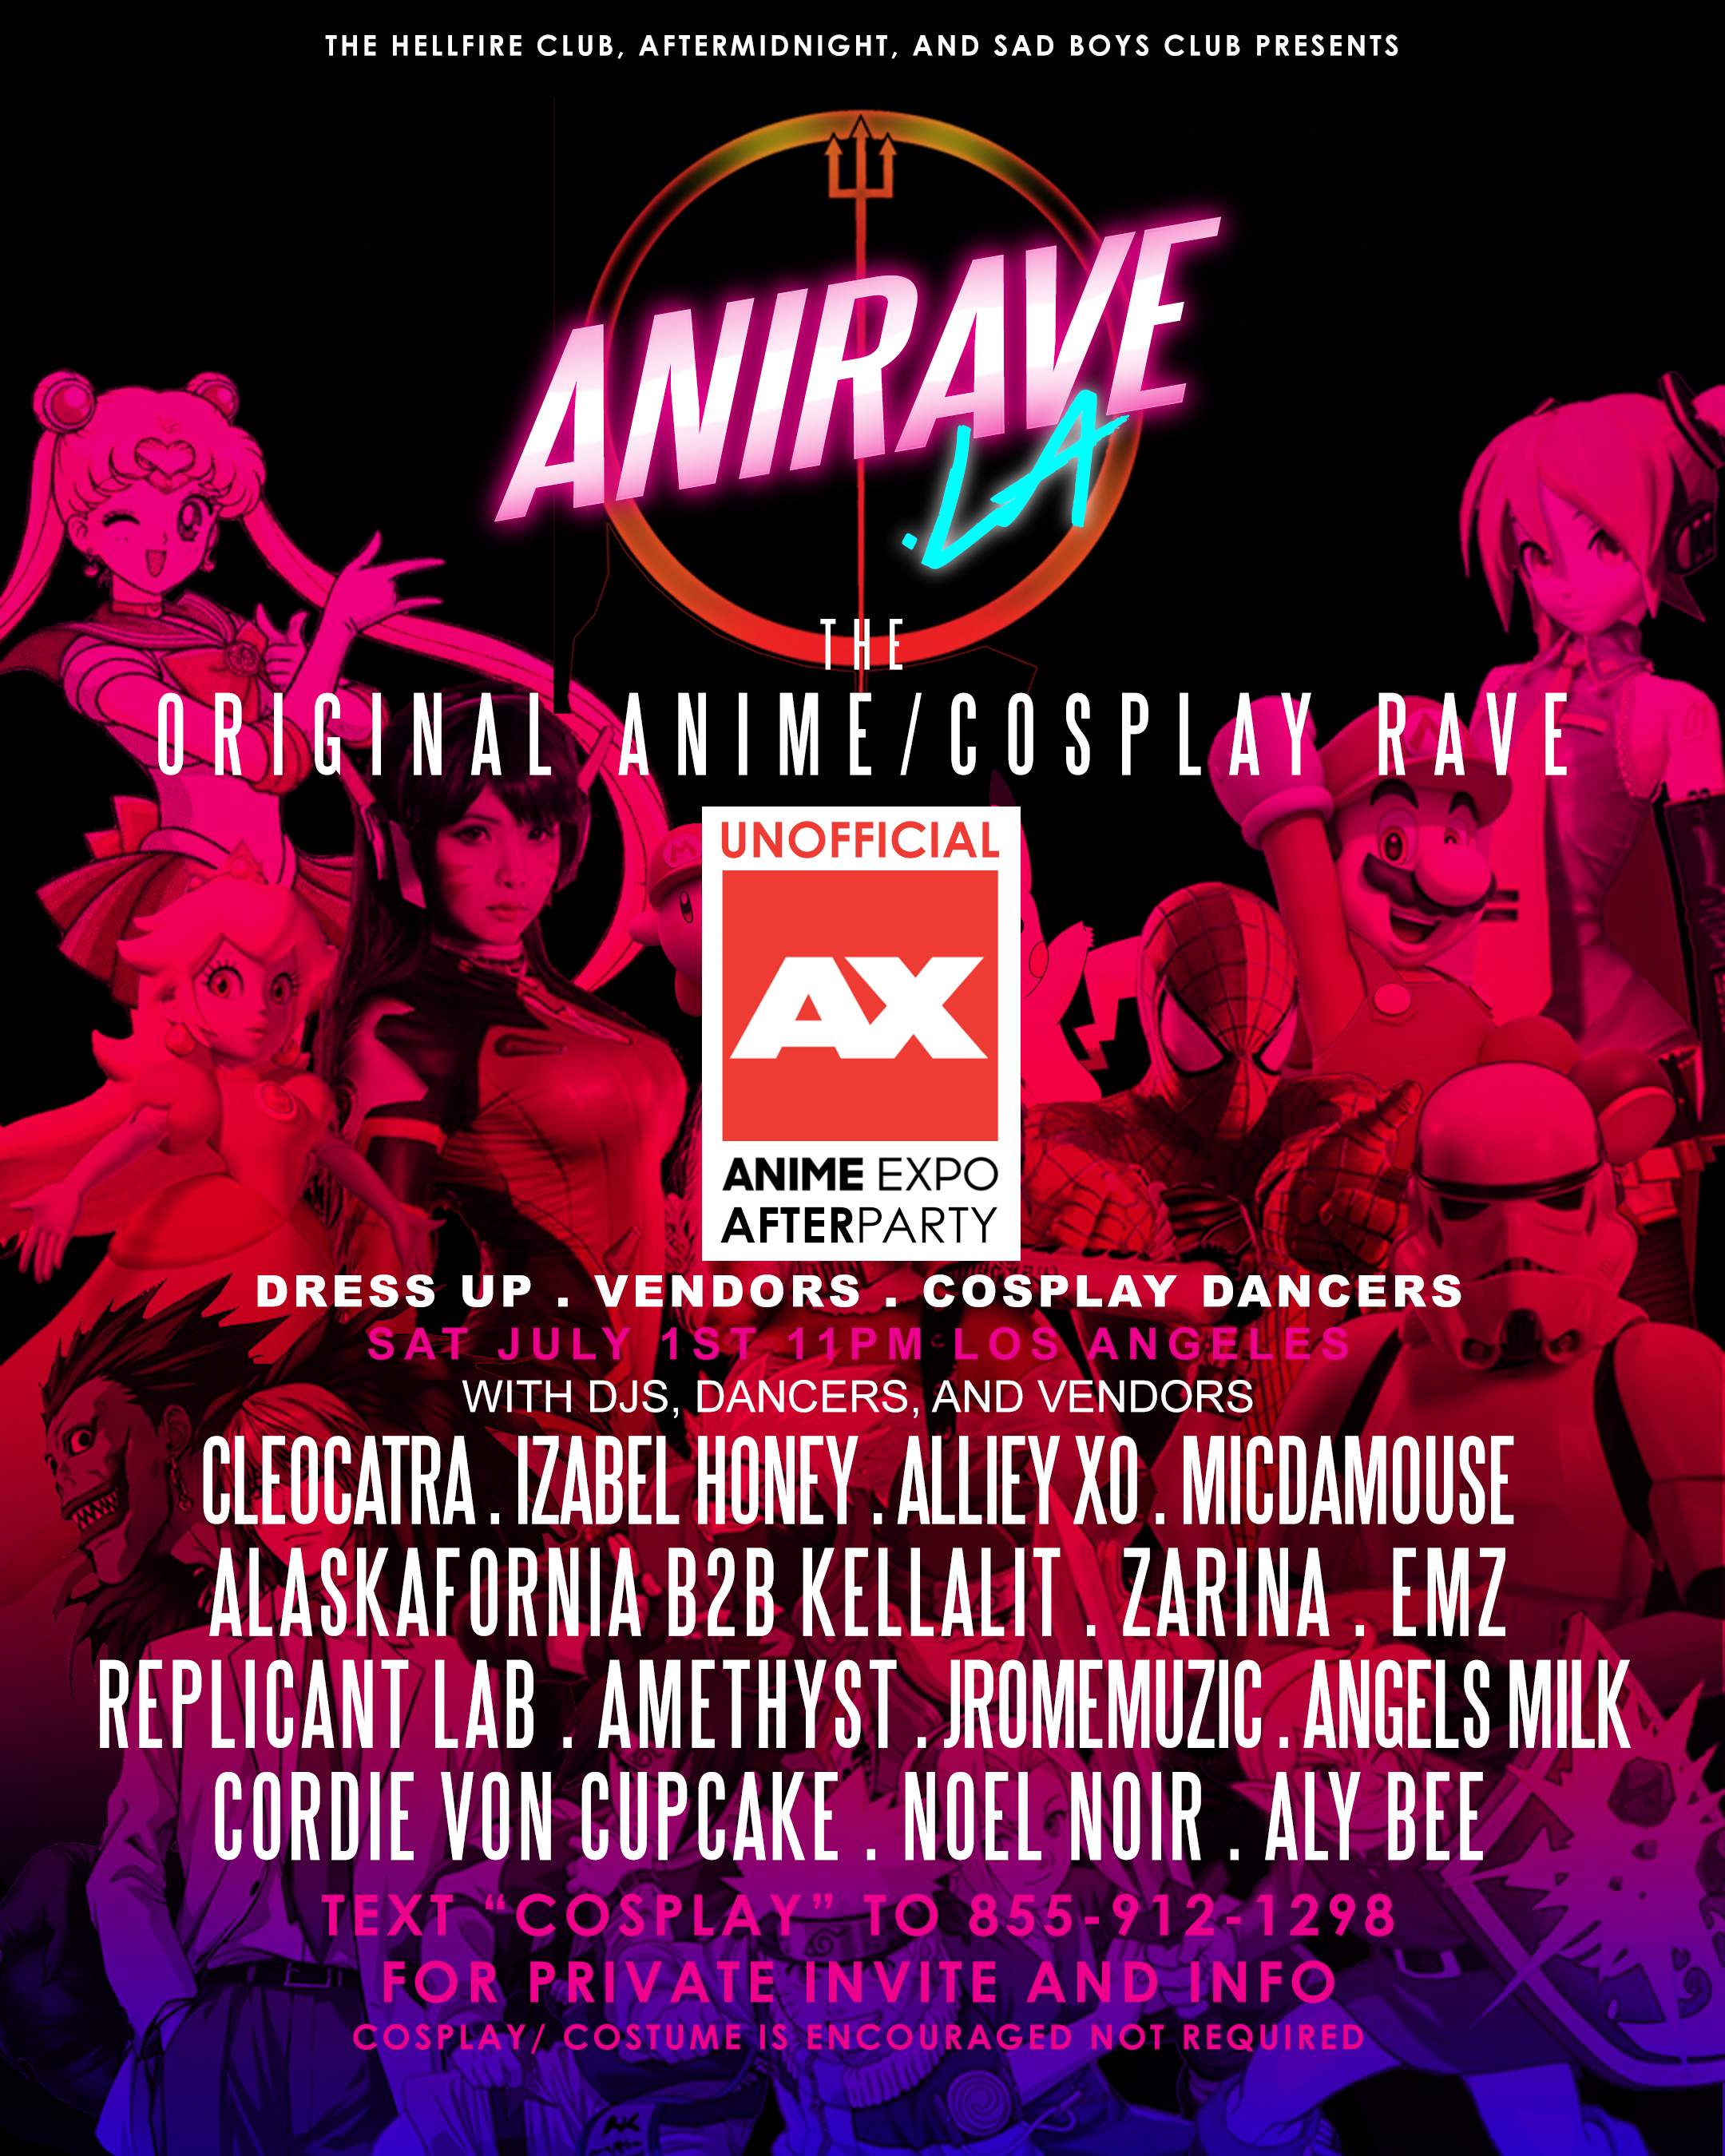 Anirave the Anime Expo cosplay afterparty at TBA, Los Angeles